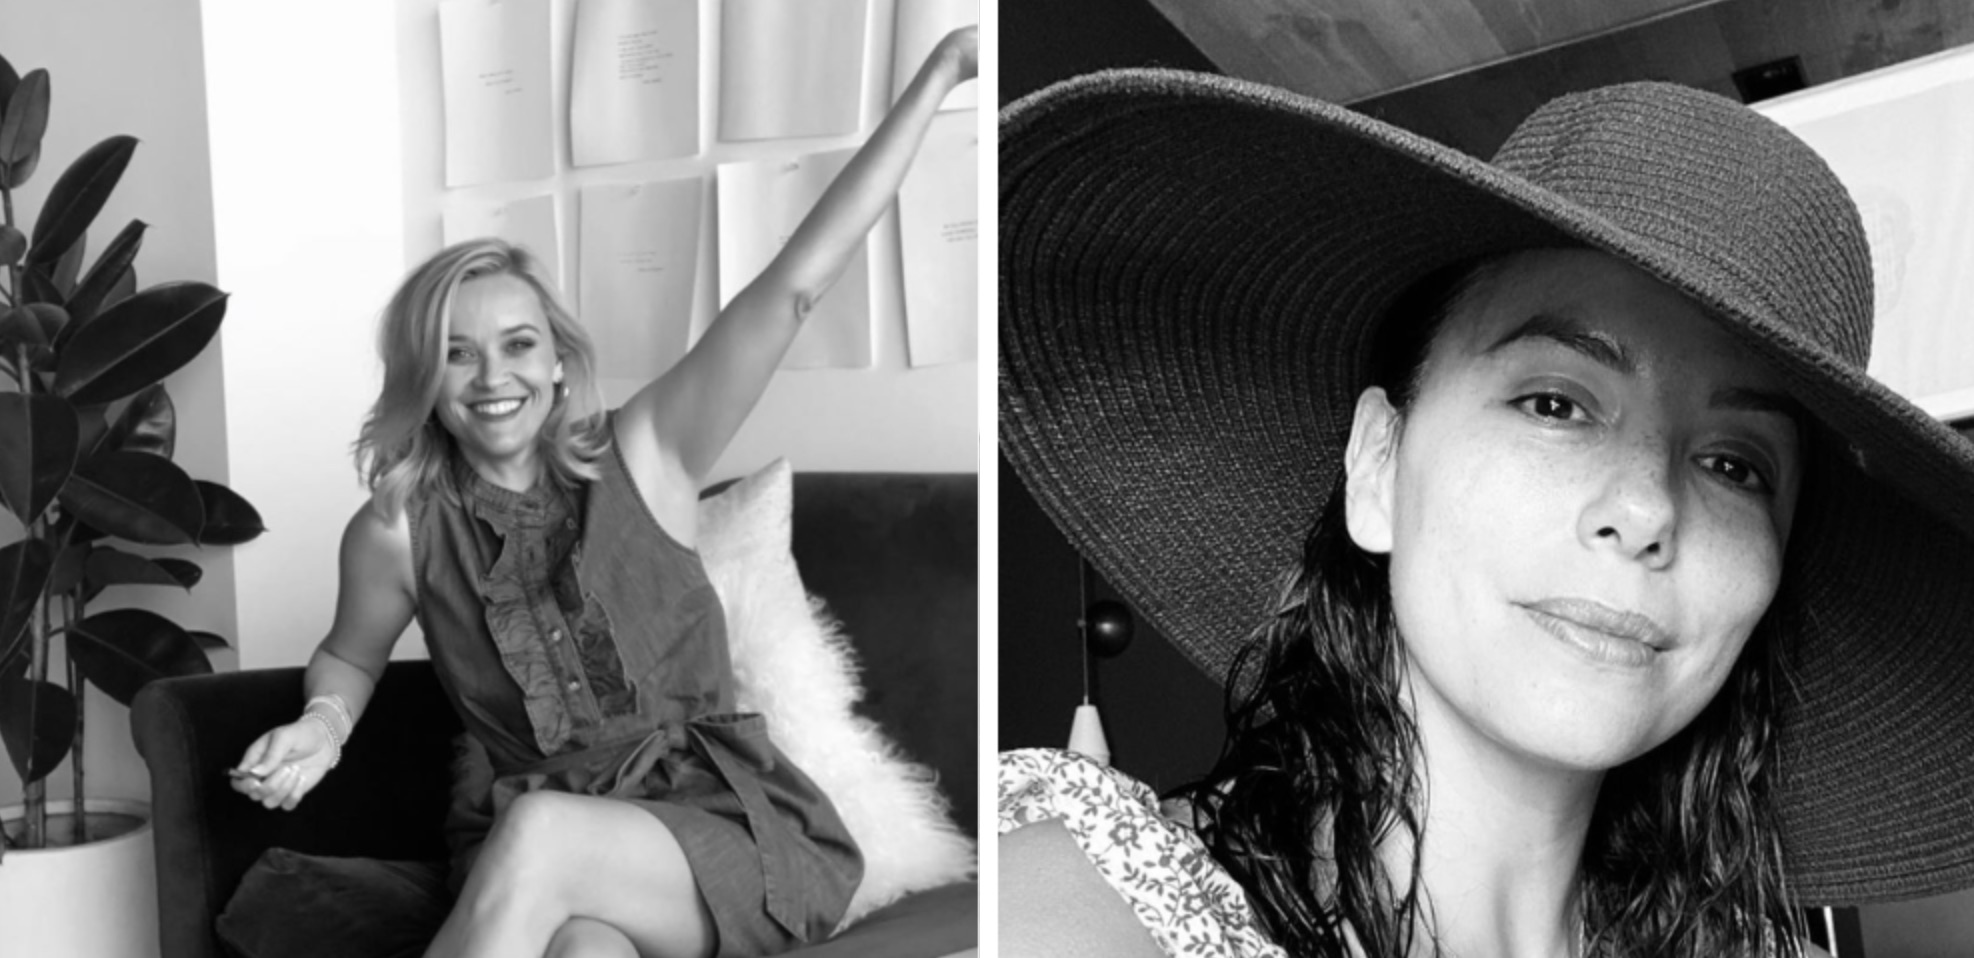 Challenge Accepted' on Instagram: Black and White Selfies for